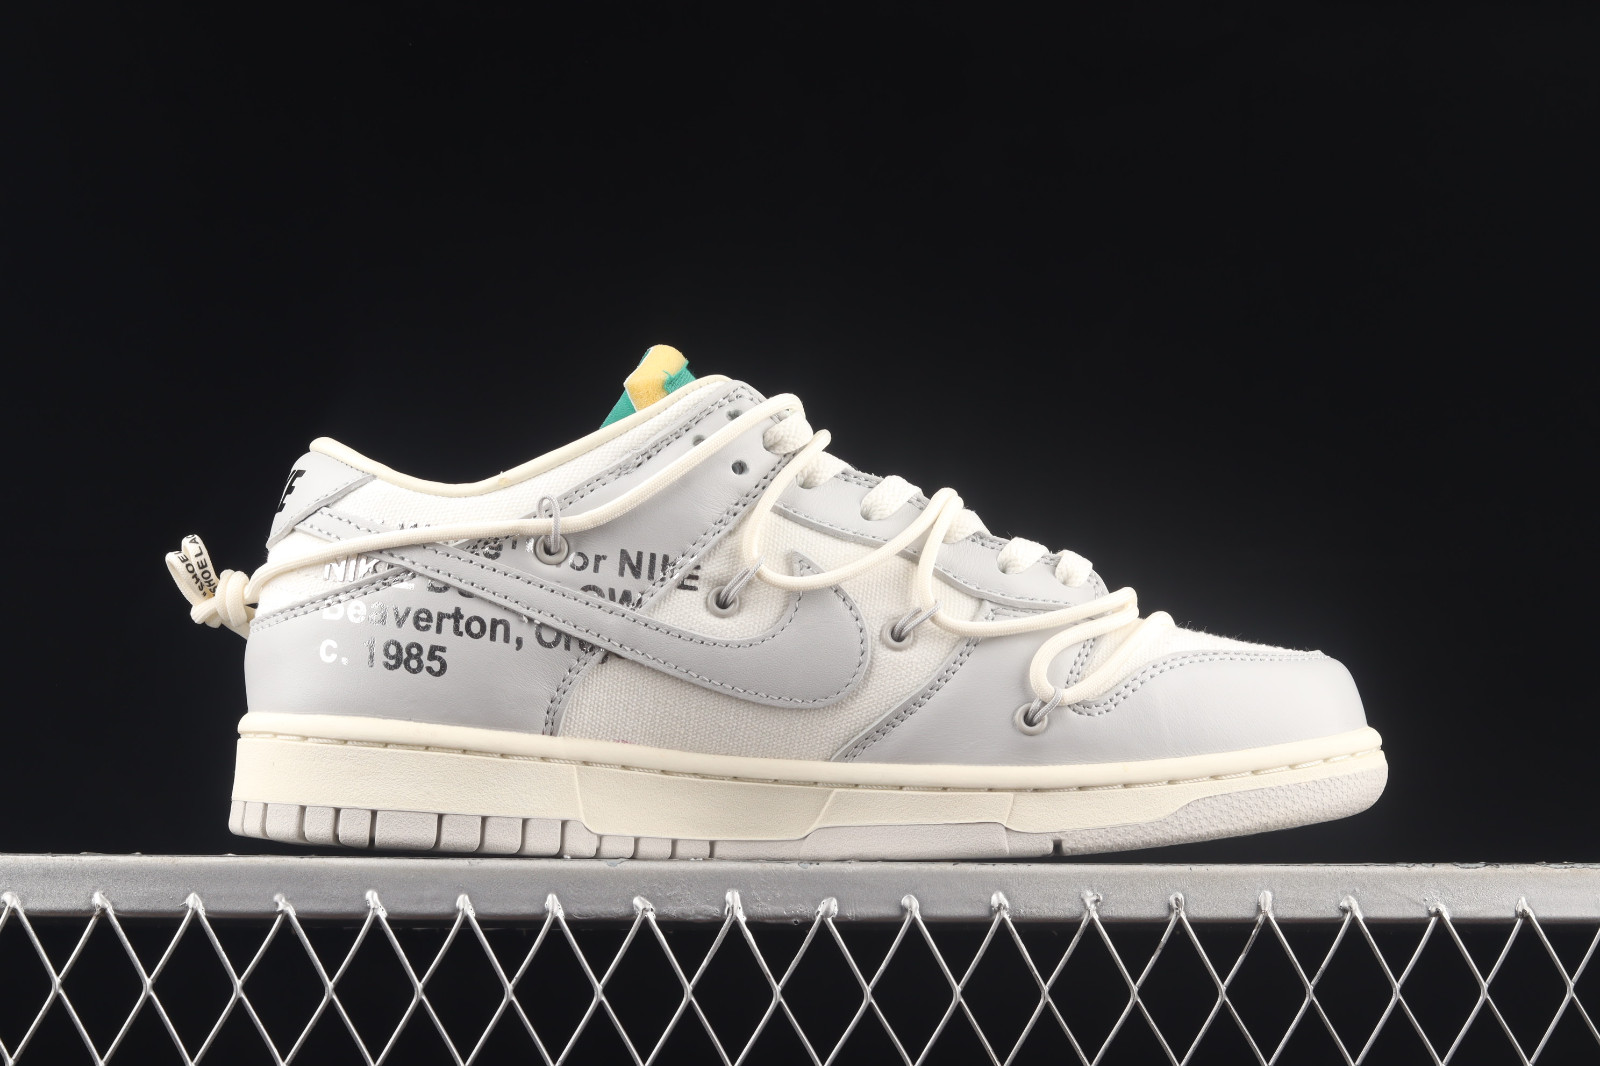 Dunk Low off White lot 25. Dunk off White lot 24. Dunk Low off White the 50. Nike Air Force off White x Nike Dunk Low lot 38 of 50 Sail Neutral Grey. White a lot